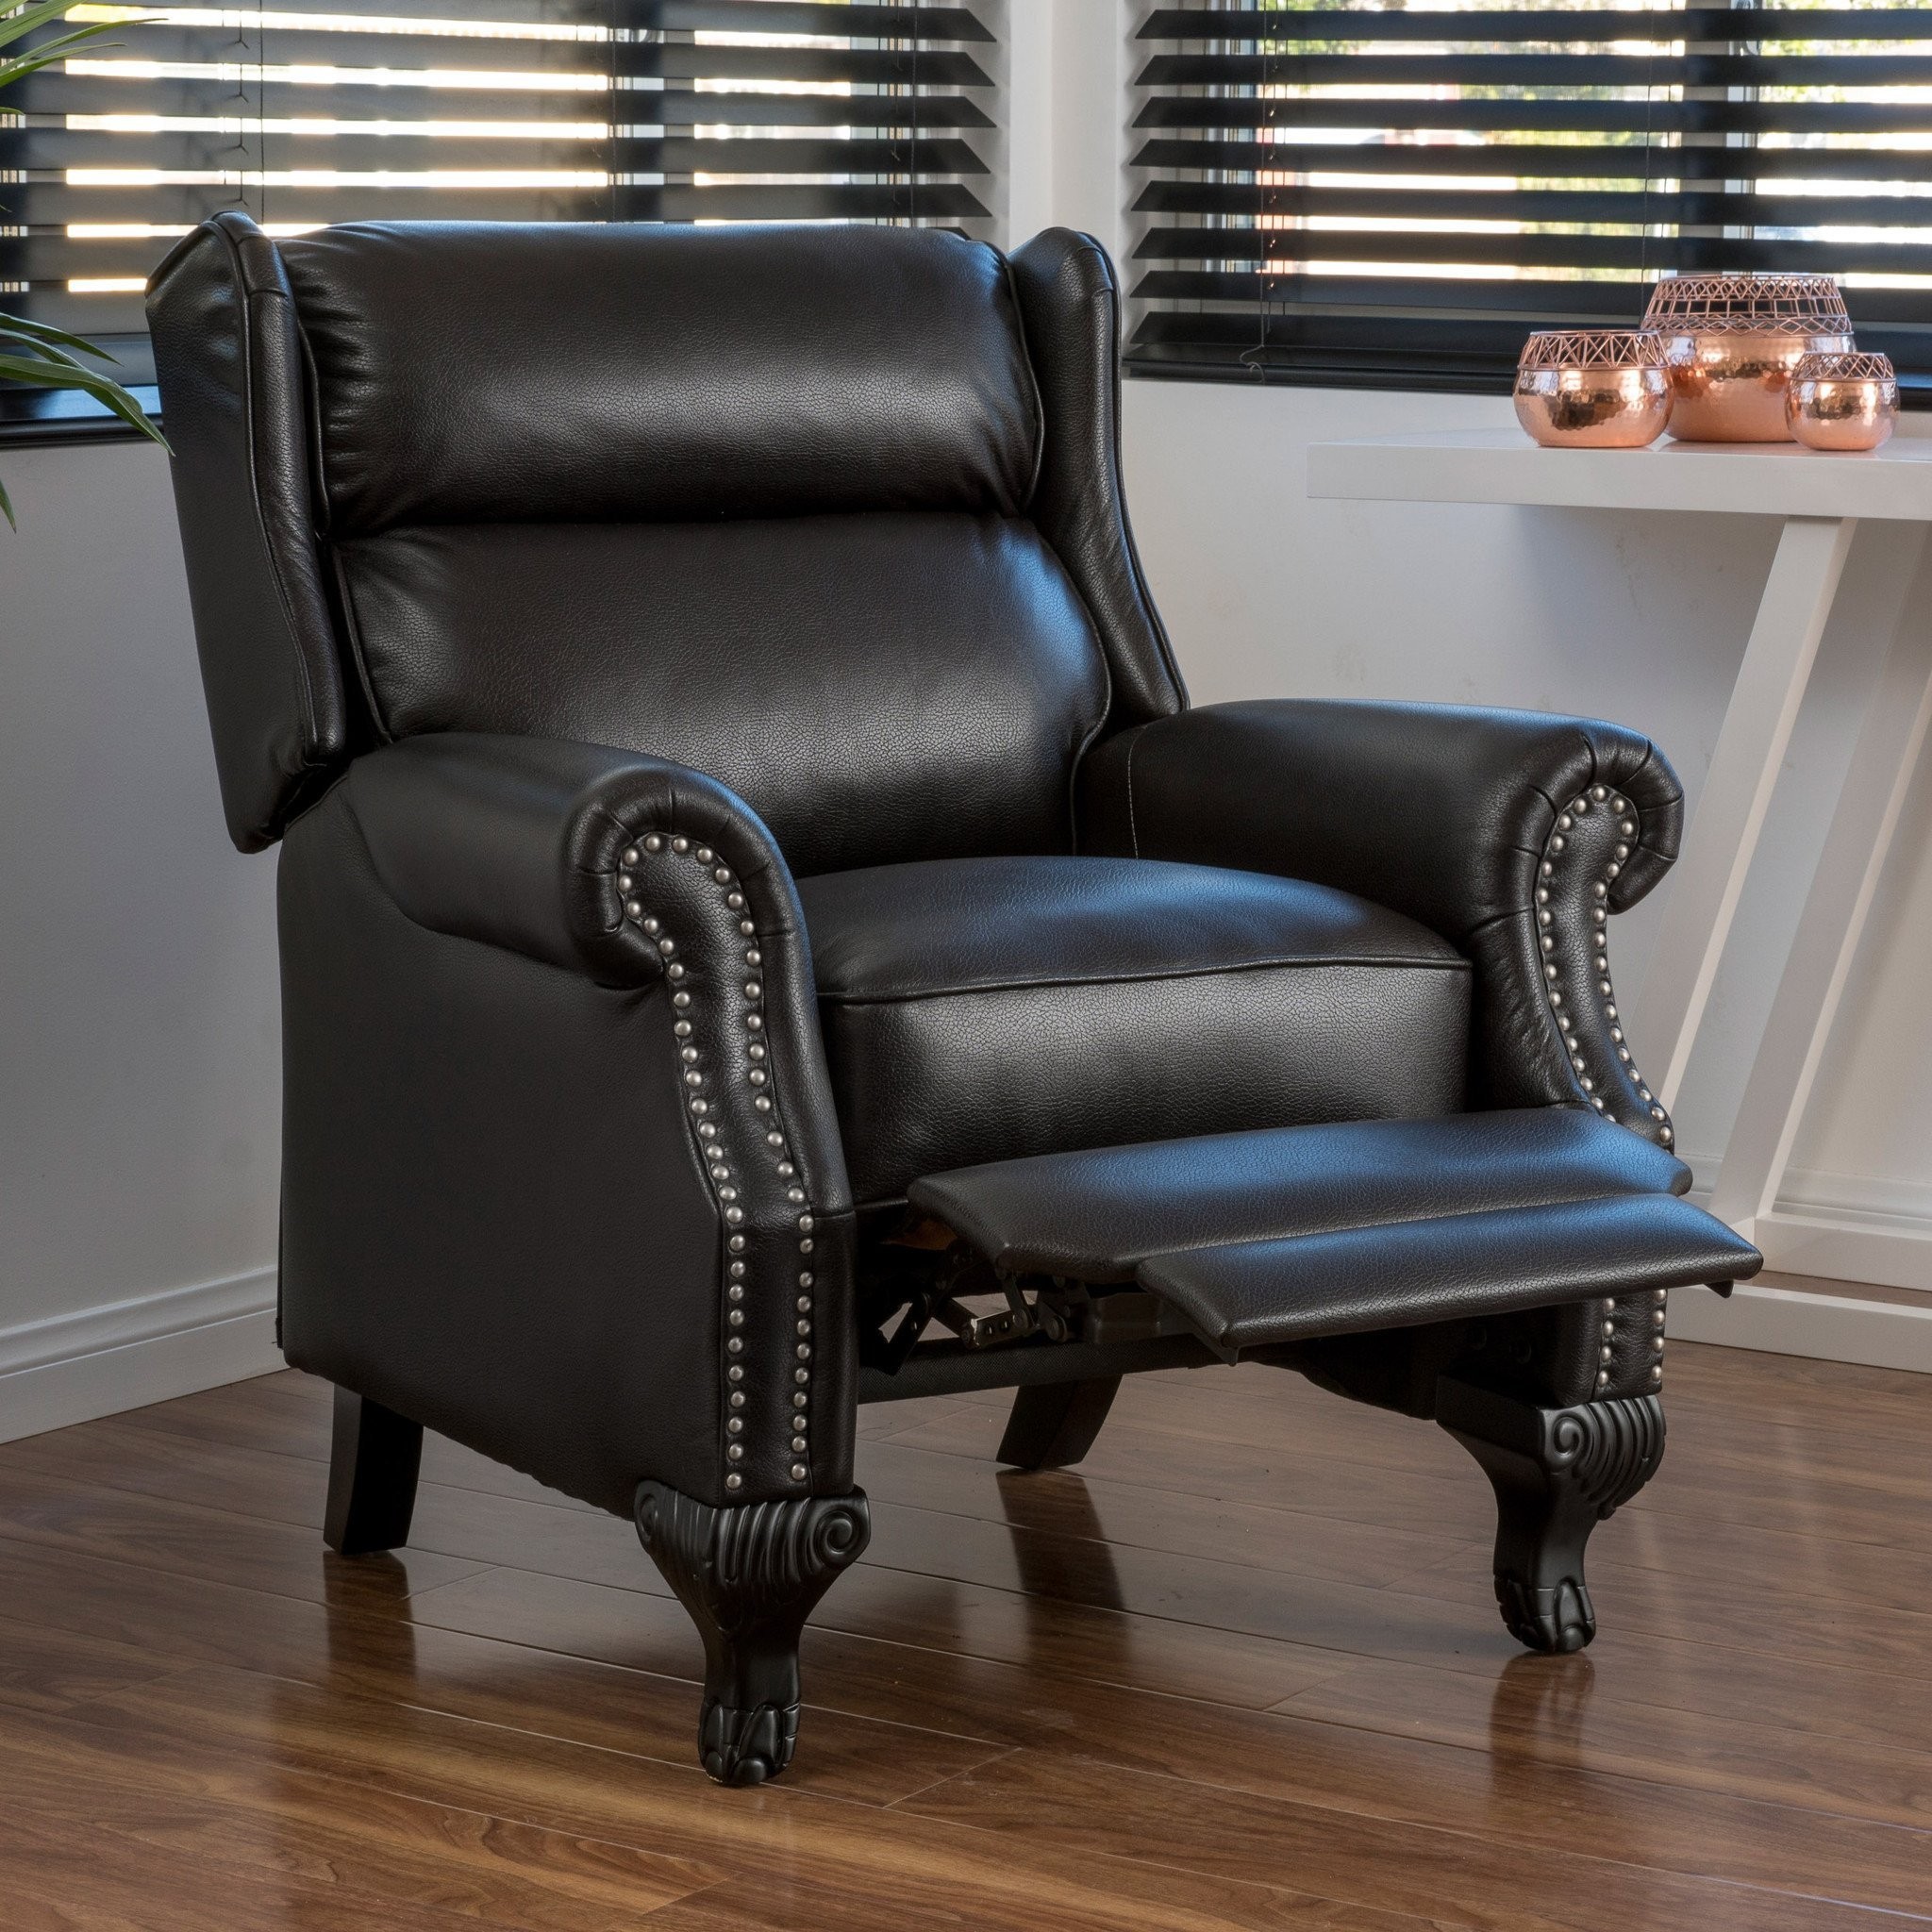 Curtis Black Leather Recliner Club Chair